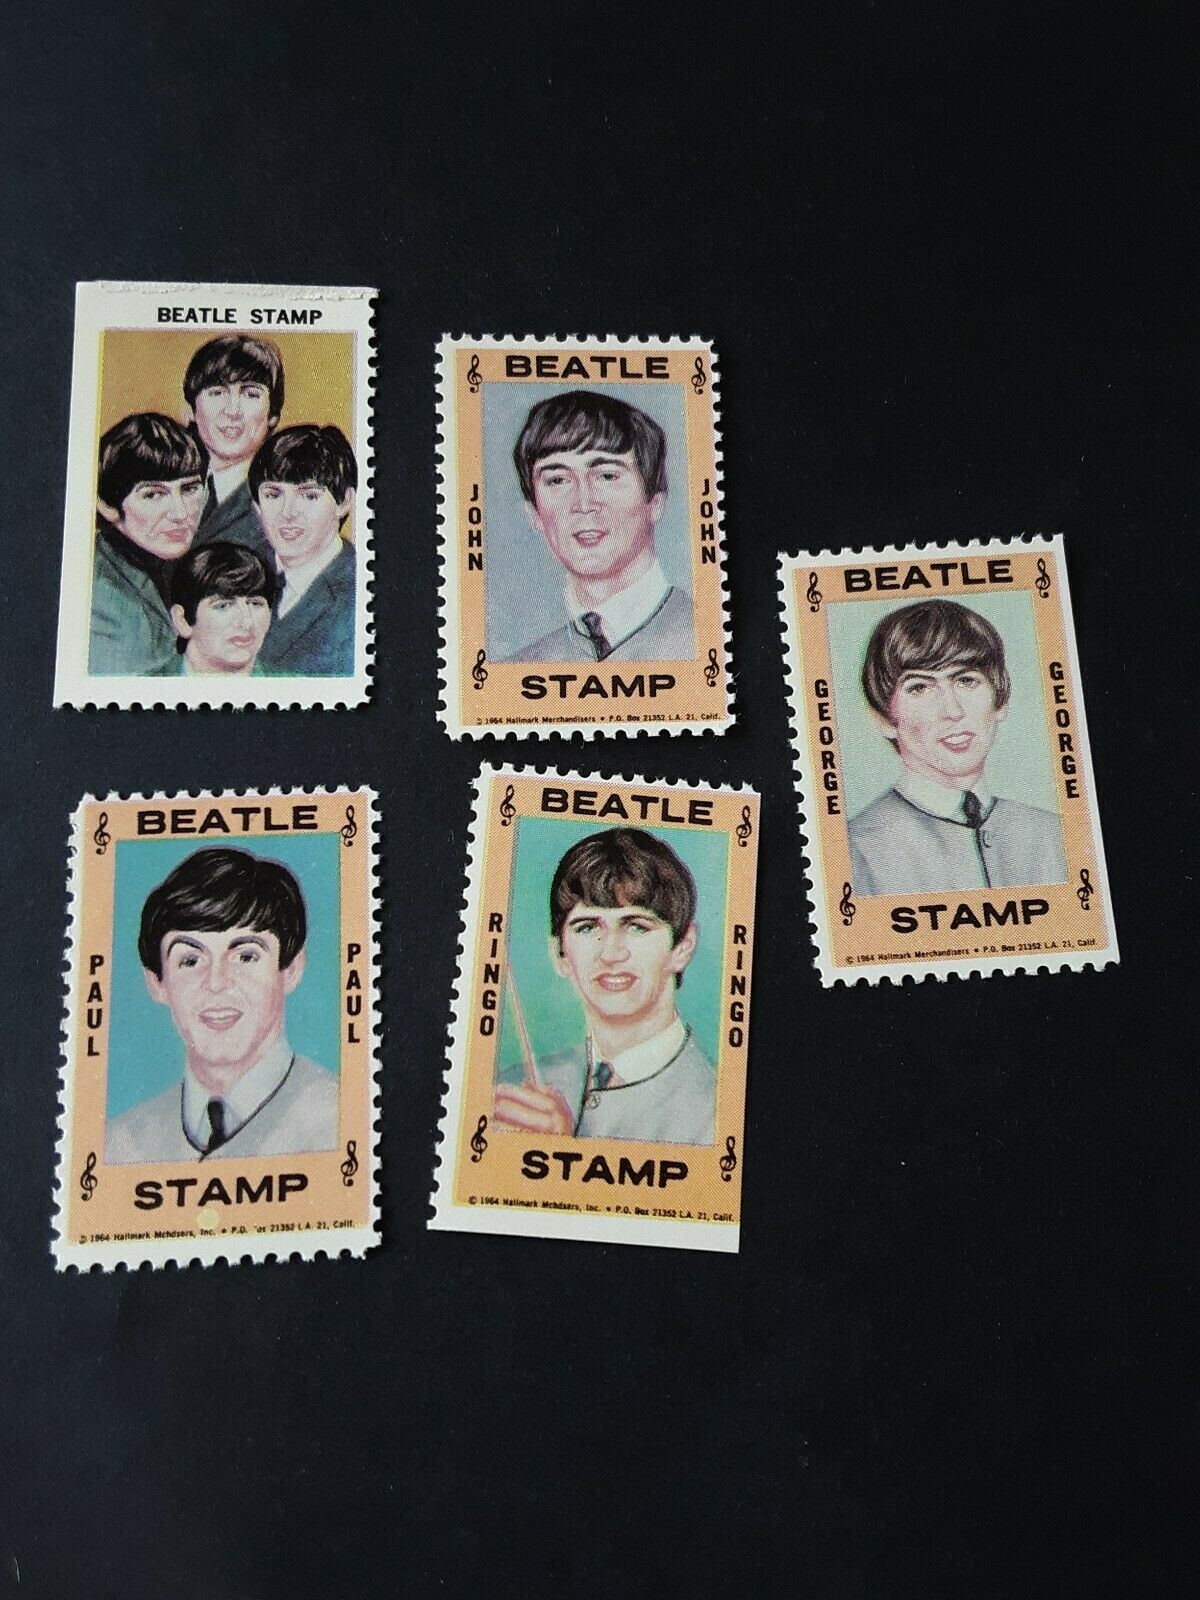 Beatles 1964 Hallmark Stamps- Full Set Of 5 Stamps With Plastic Holders Included